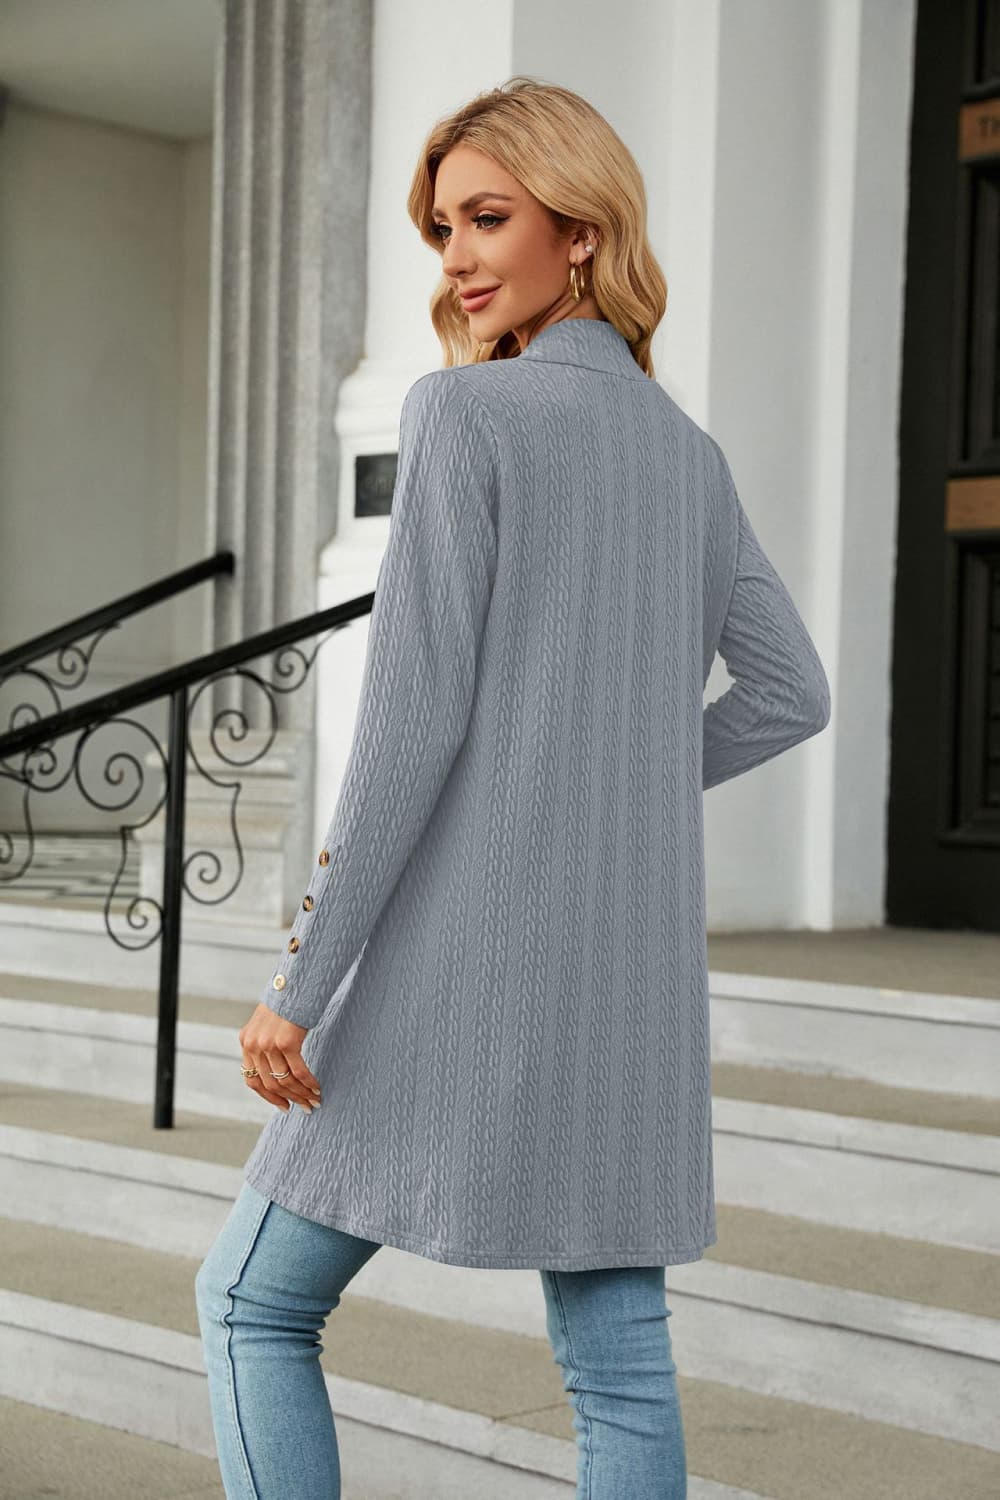 Long Sleeve Open Front Cardigan - Women’s Clothing & Accessories - Shirts & Tops - 21 - 2024